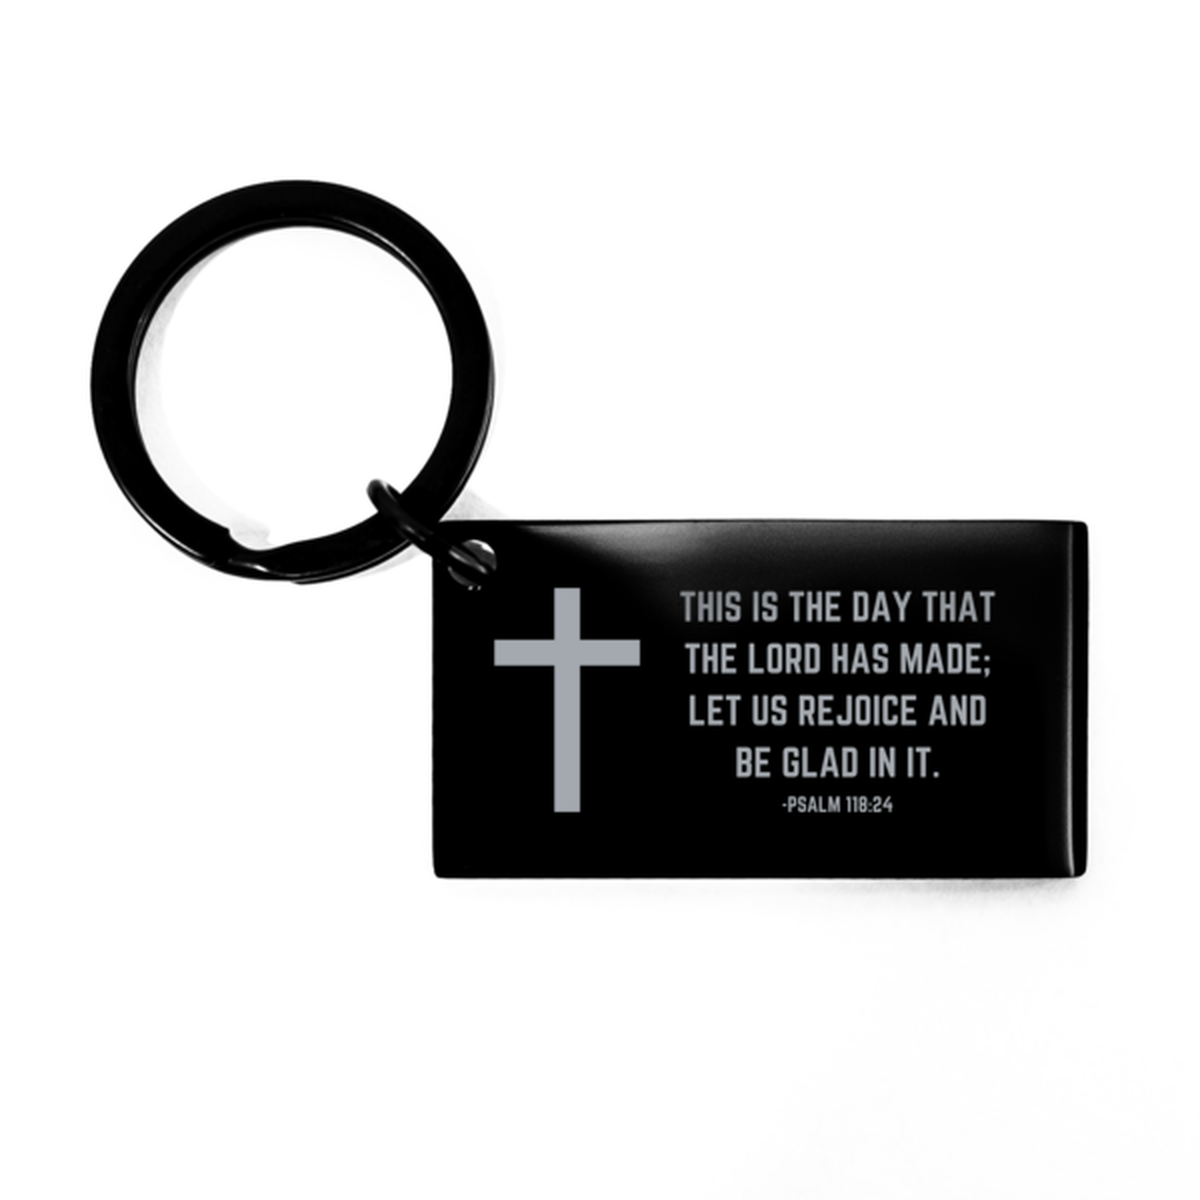 Baptism Gifts For Teenage Boys Girls, Christian Bible Verse Black Keychain, This is the day that the lord has made, Confirmation Gifts, Bible Verse Keyring for Son, Godson, Grandson, Nephew